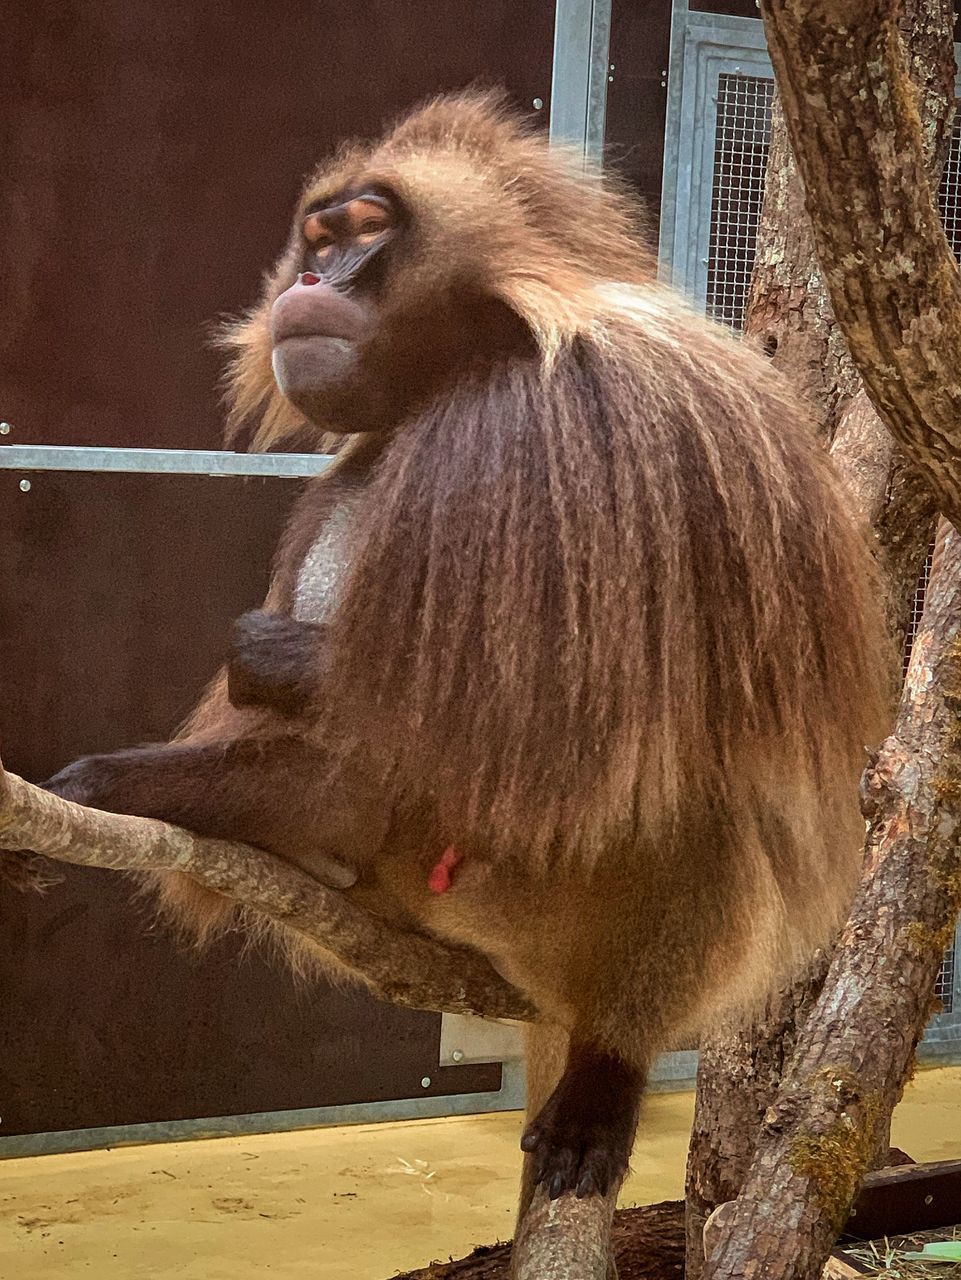 LOW ANGLE VIEW OF MONKEY SITTING ON A ZOO